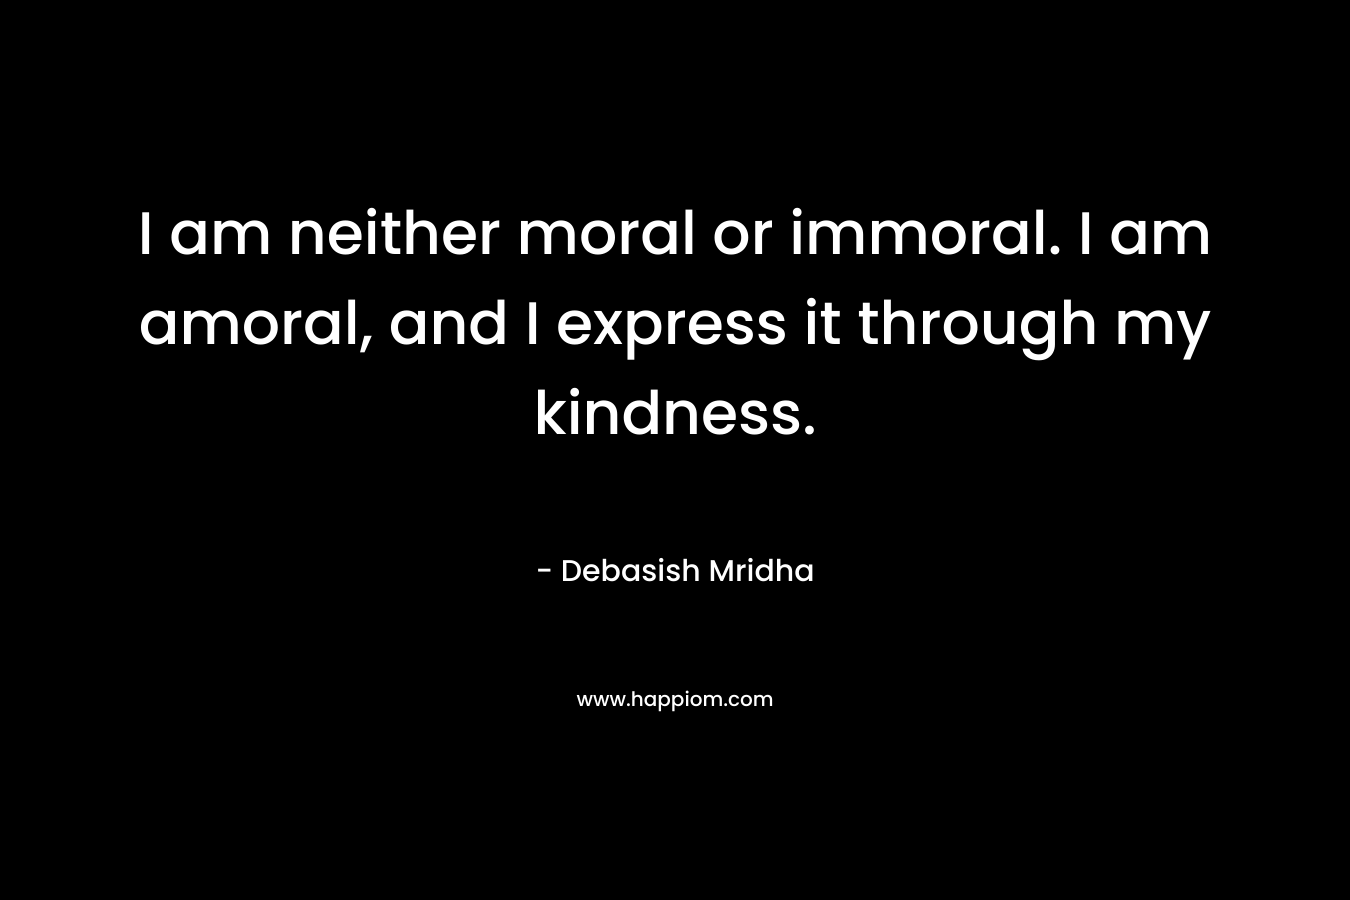 I am neither moral or immoral. I am amoral, and I express it through my kindness.